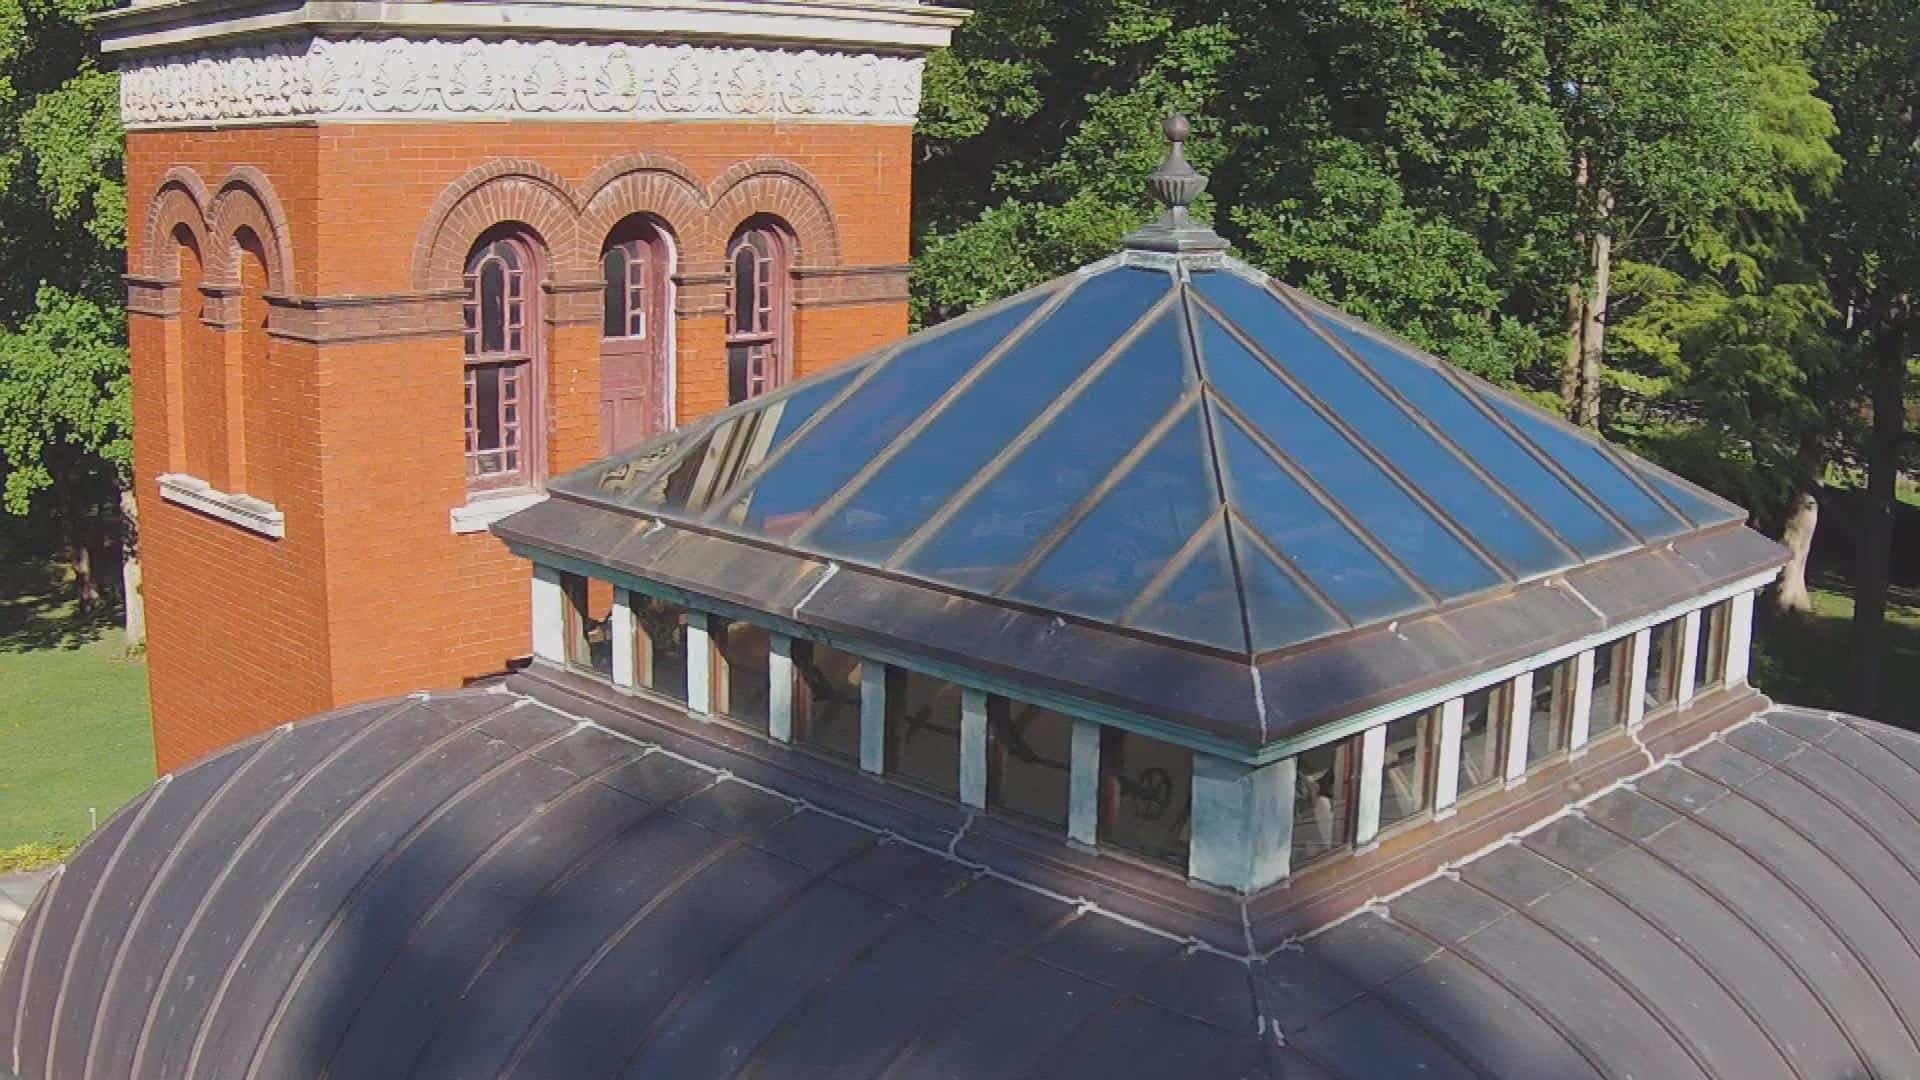 Aerial shot depicting General Lew Wallace's Study (Tower close-up)